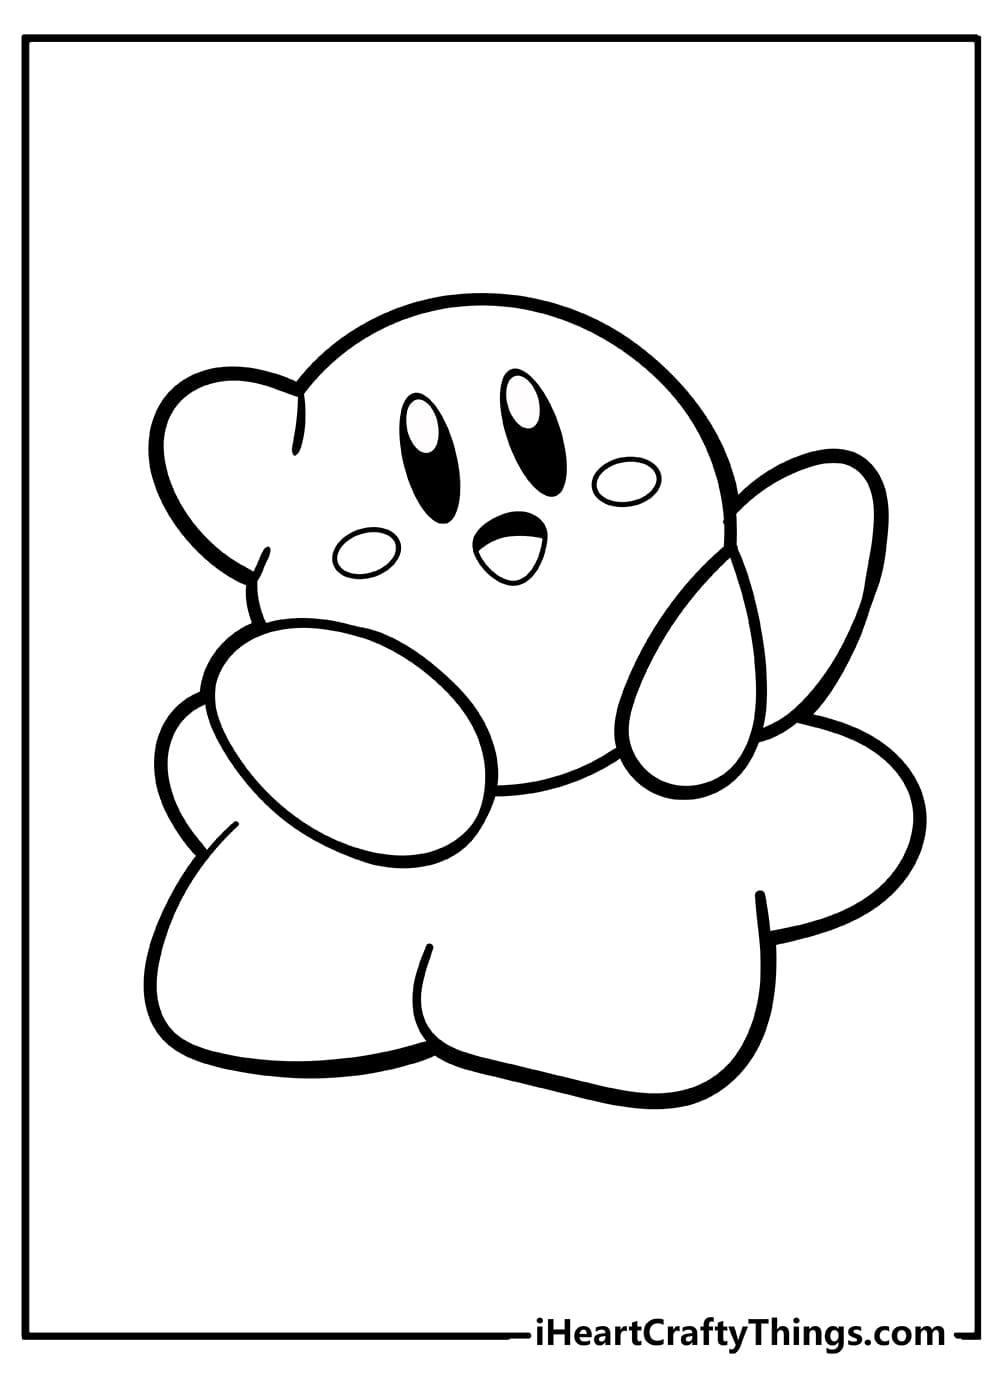 Cute Kirby Image For Kids Coloring Page